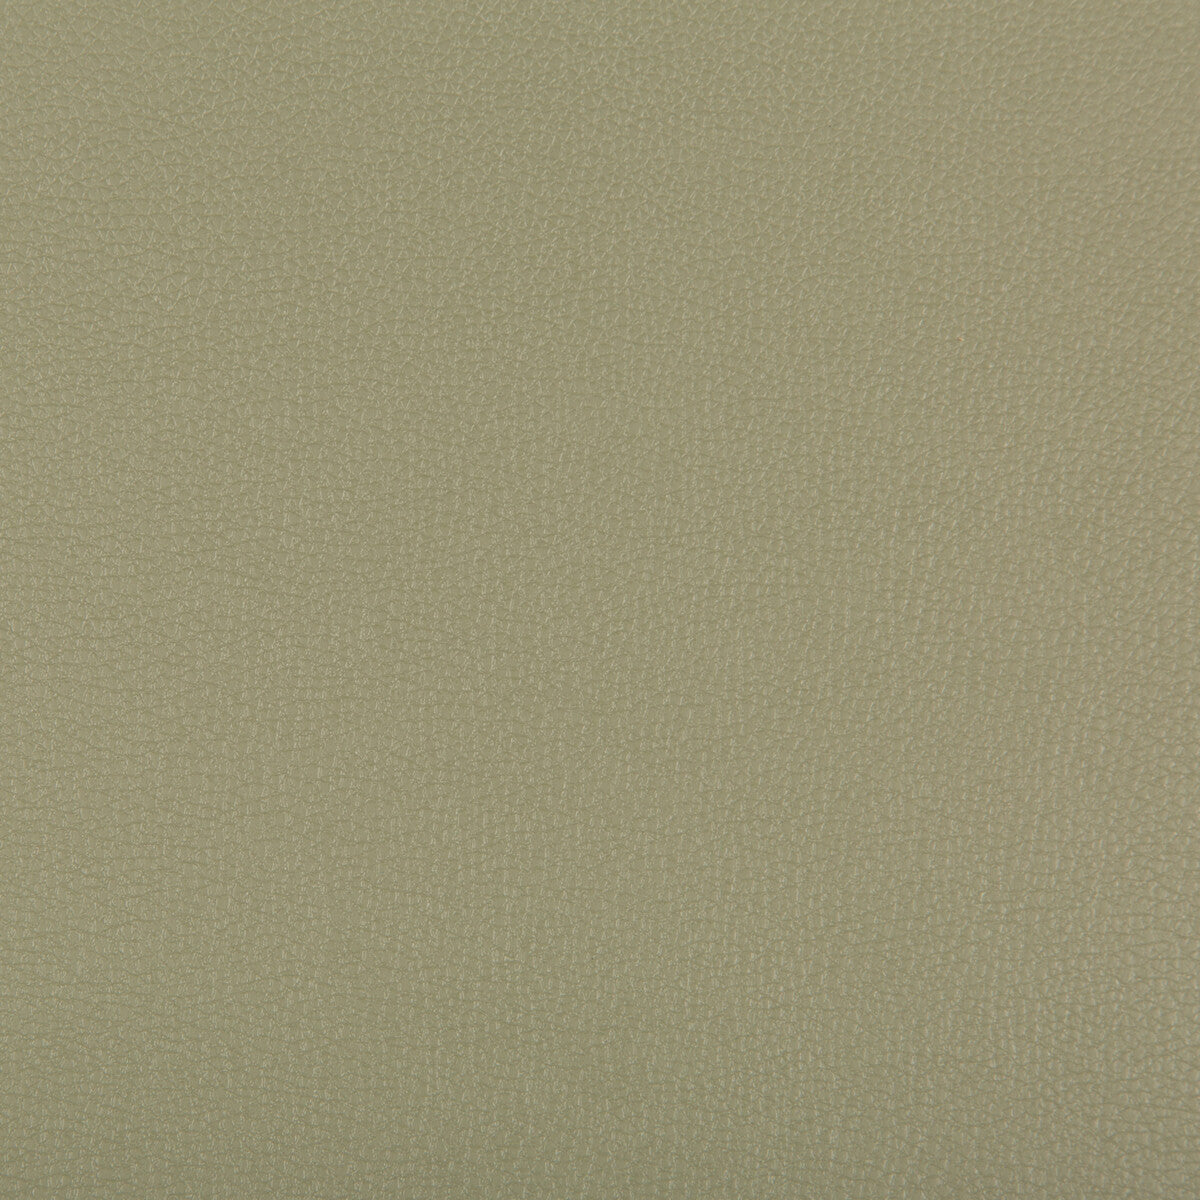 Syrus fabric in sage color - pattern SYRUS.311.0 - by Kravet Contract